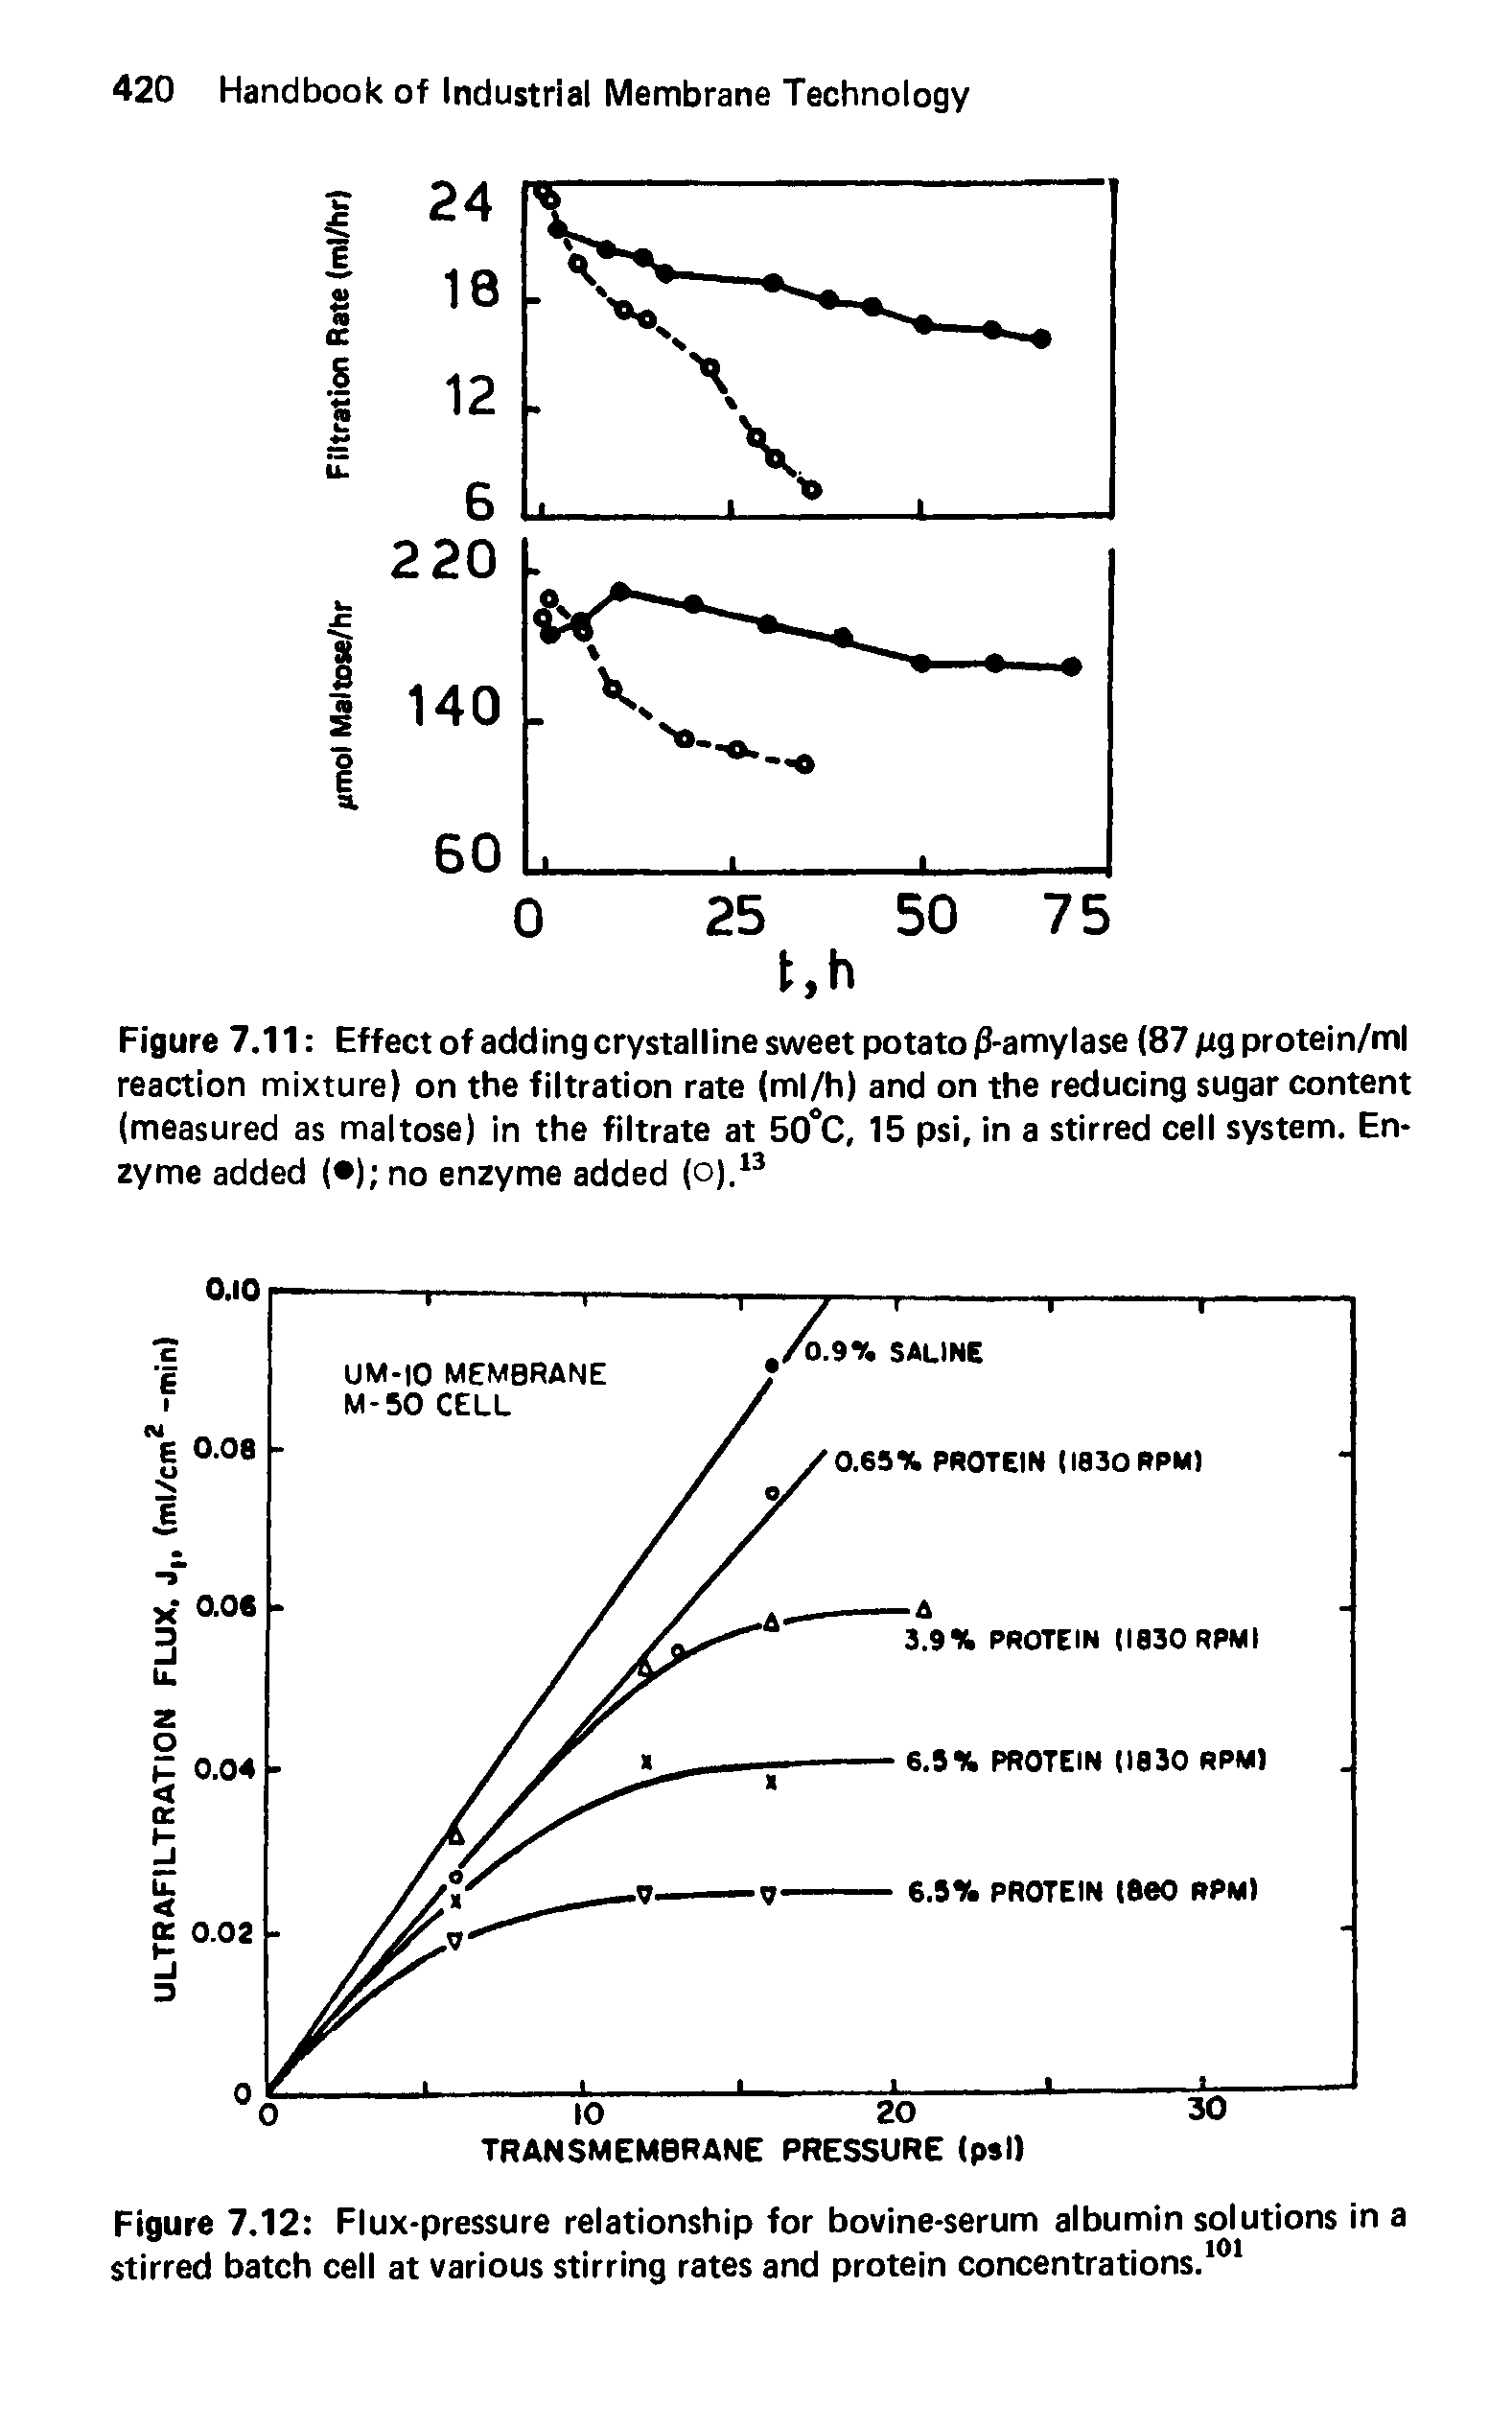 Figure 7.11 Effect of adding crystalline sweet potato 0-amylase (87 fig protein/ml reaction mixture) on the filtration rate (ml/h) and on the reducing sugar content (measured as maltose) in the filtrate at 50°C, 15 psi, in a stirred cell system. Enzyme added ( ) no enzyme added (o).13...